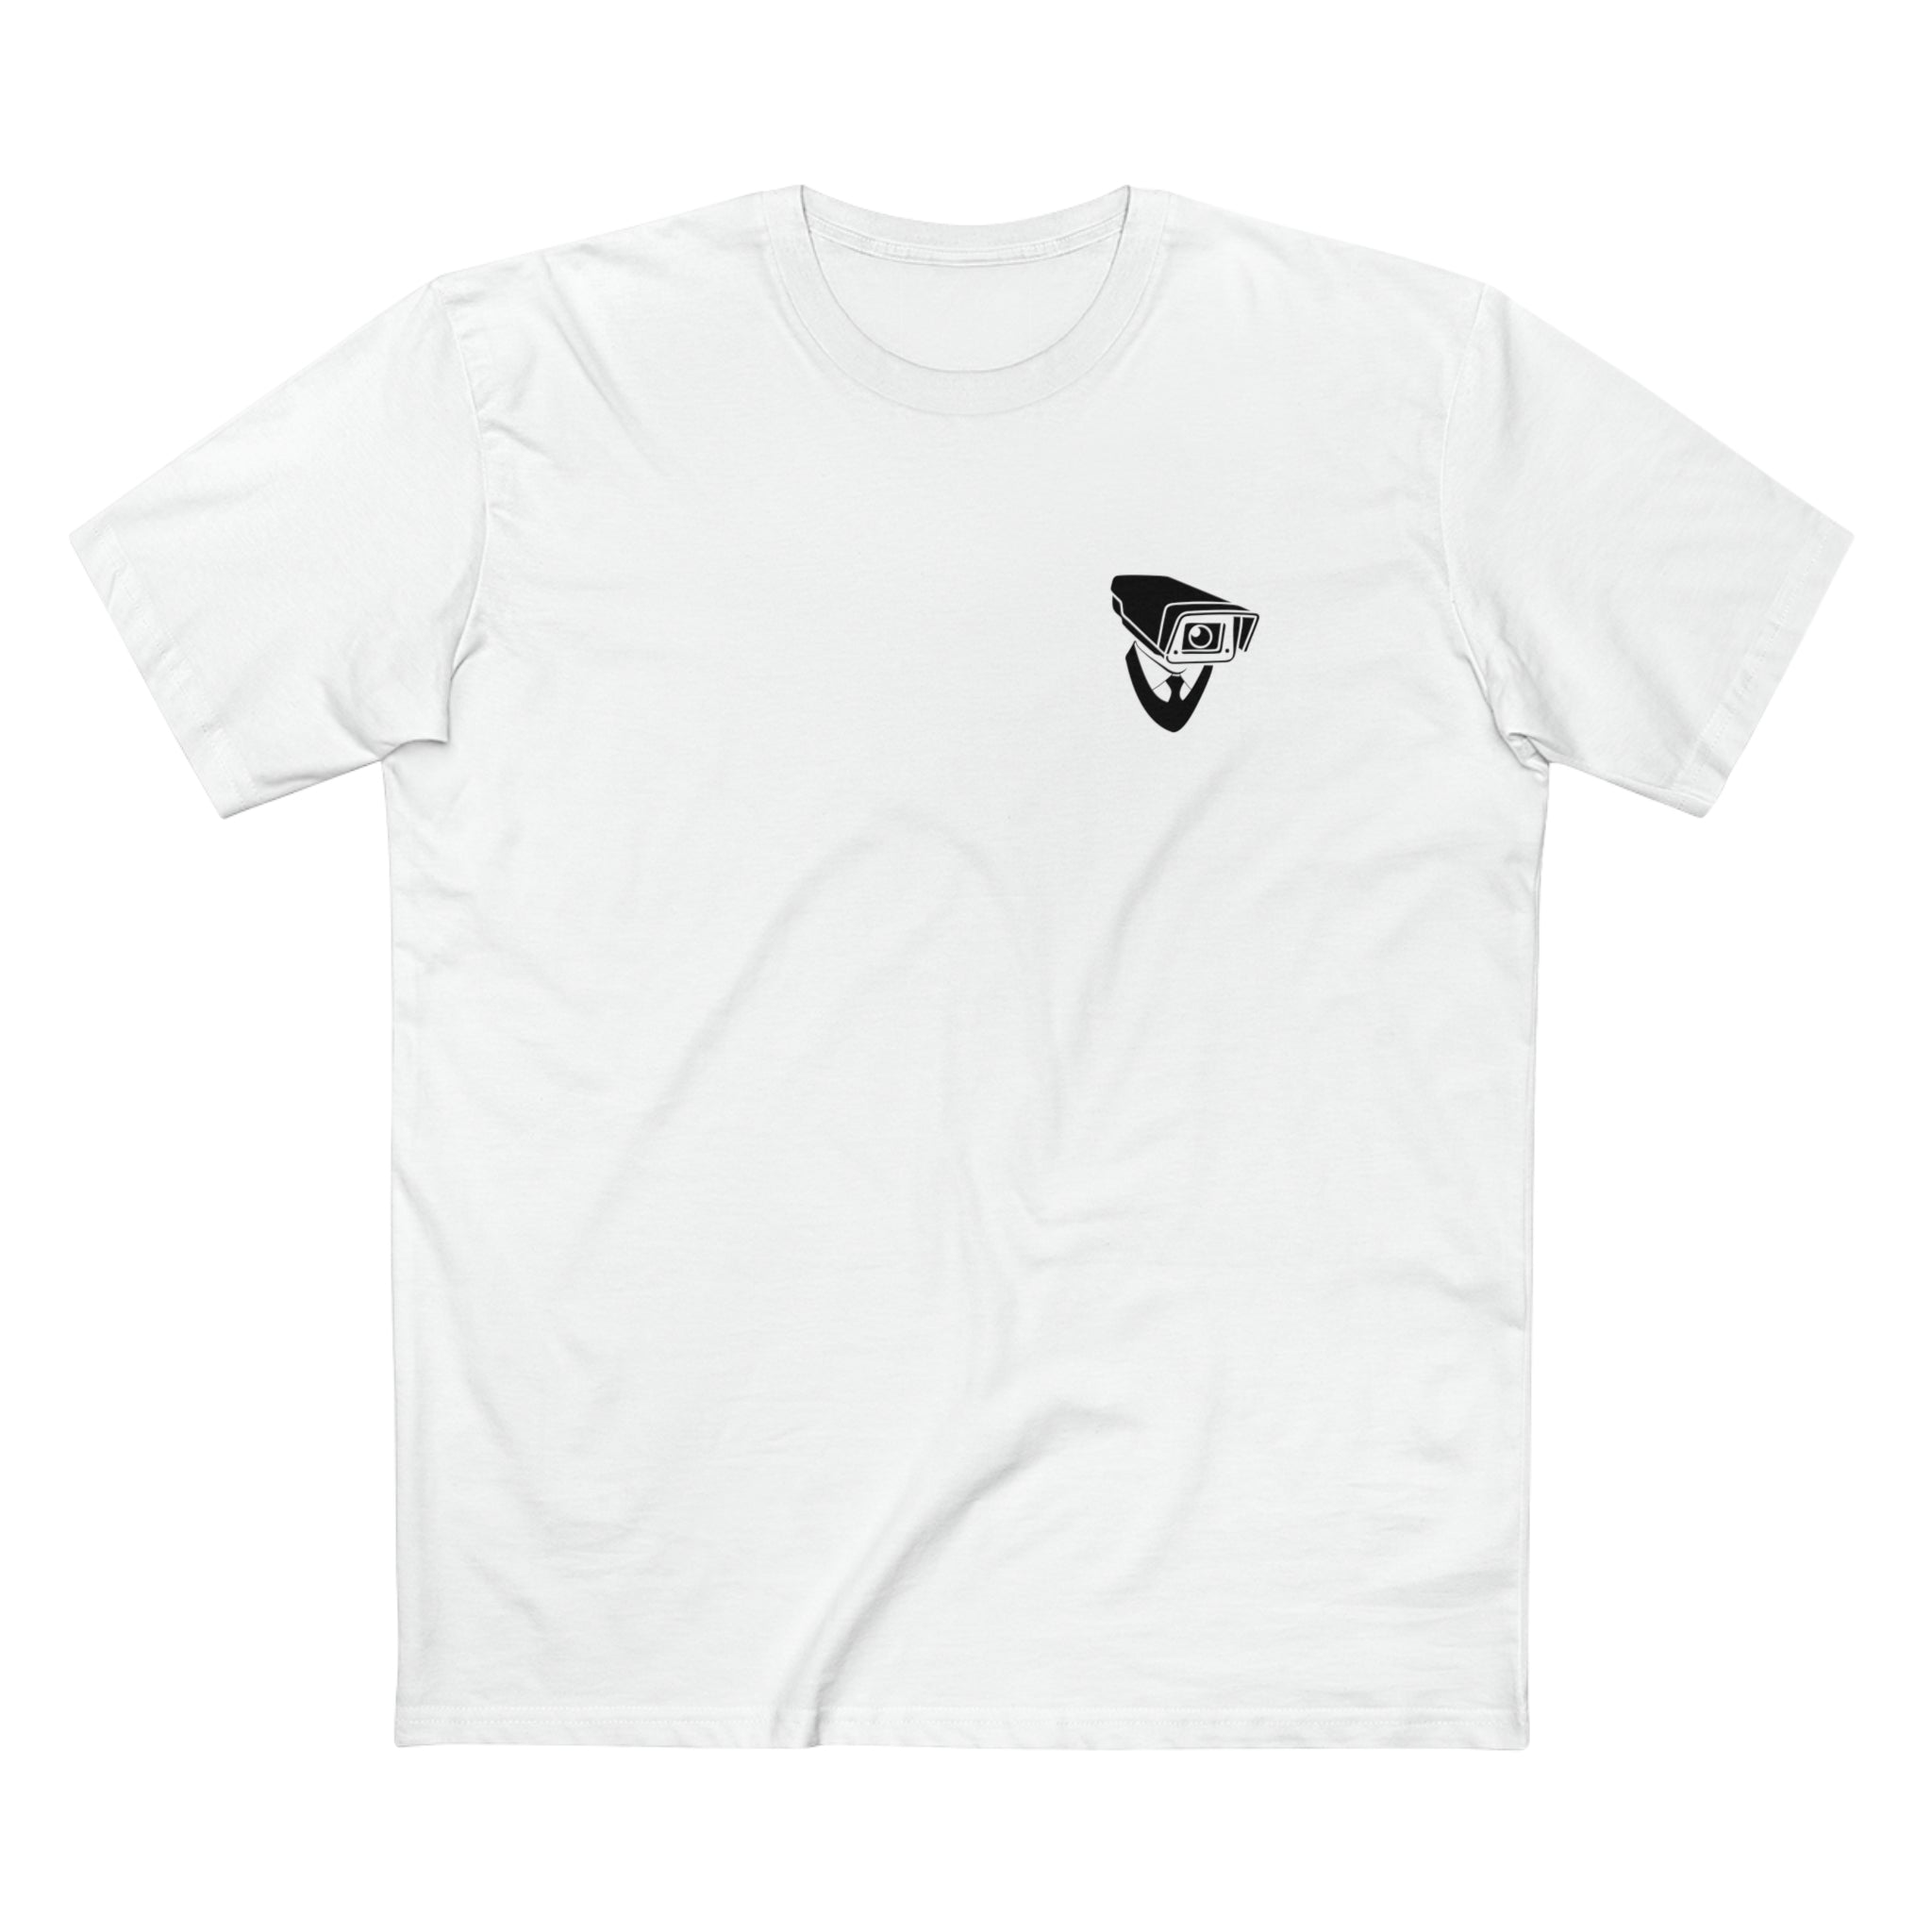 Surveillance Tee with iconic cameraman logo breast hit White Tee on White Background